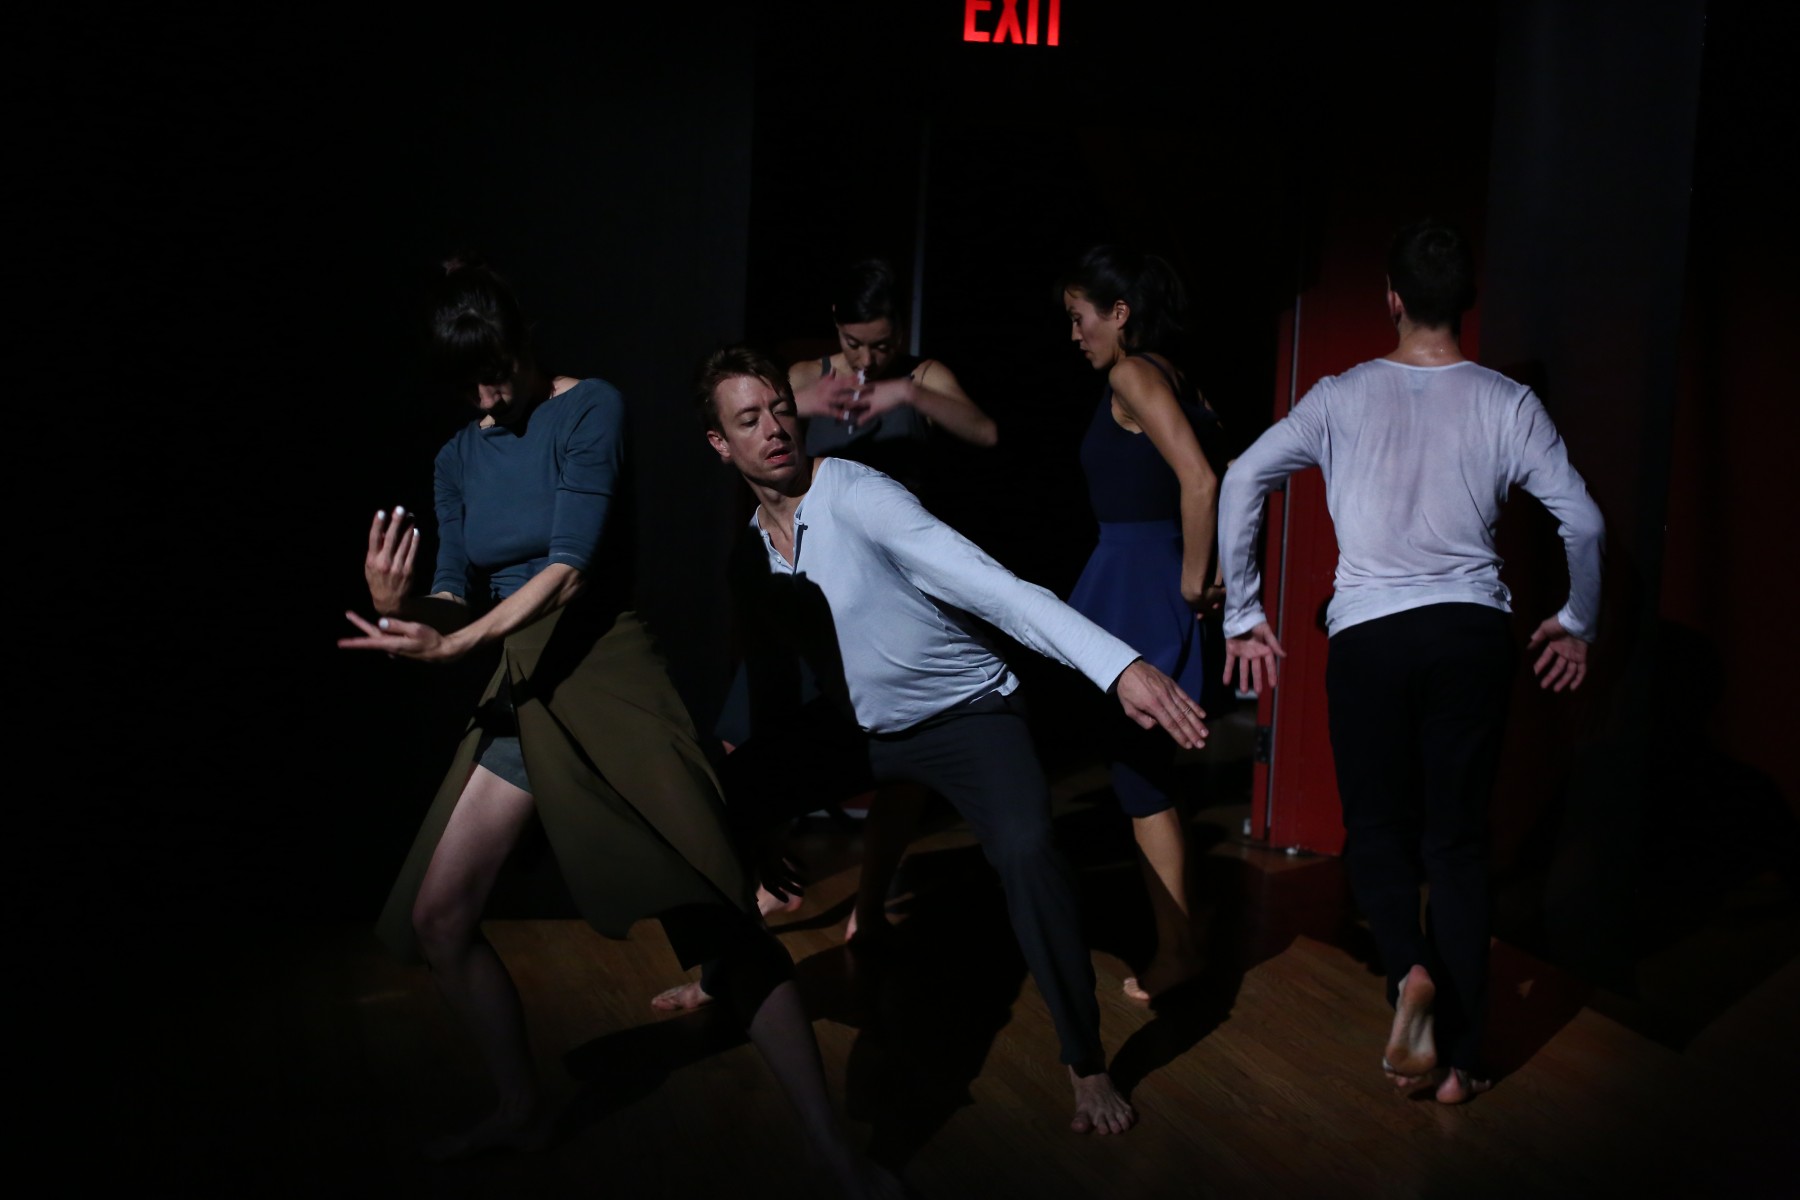 Sally Silver's cast dances in a tight clump in the shadows